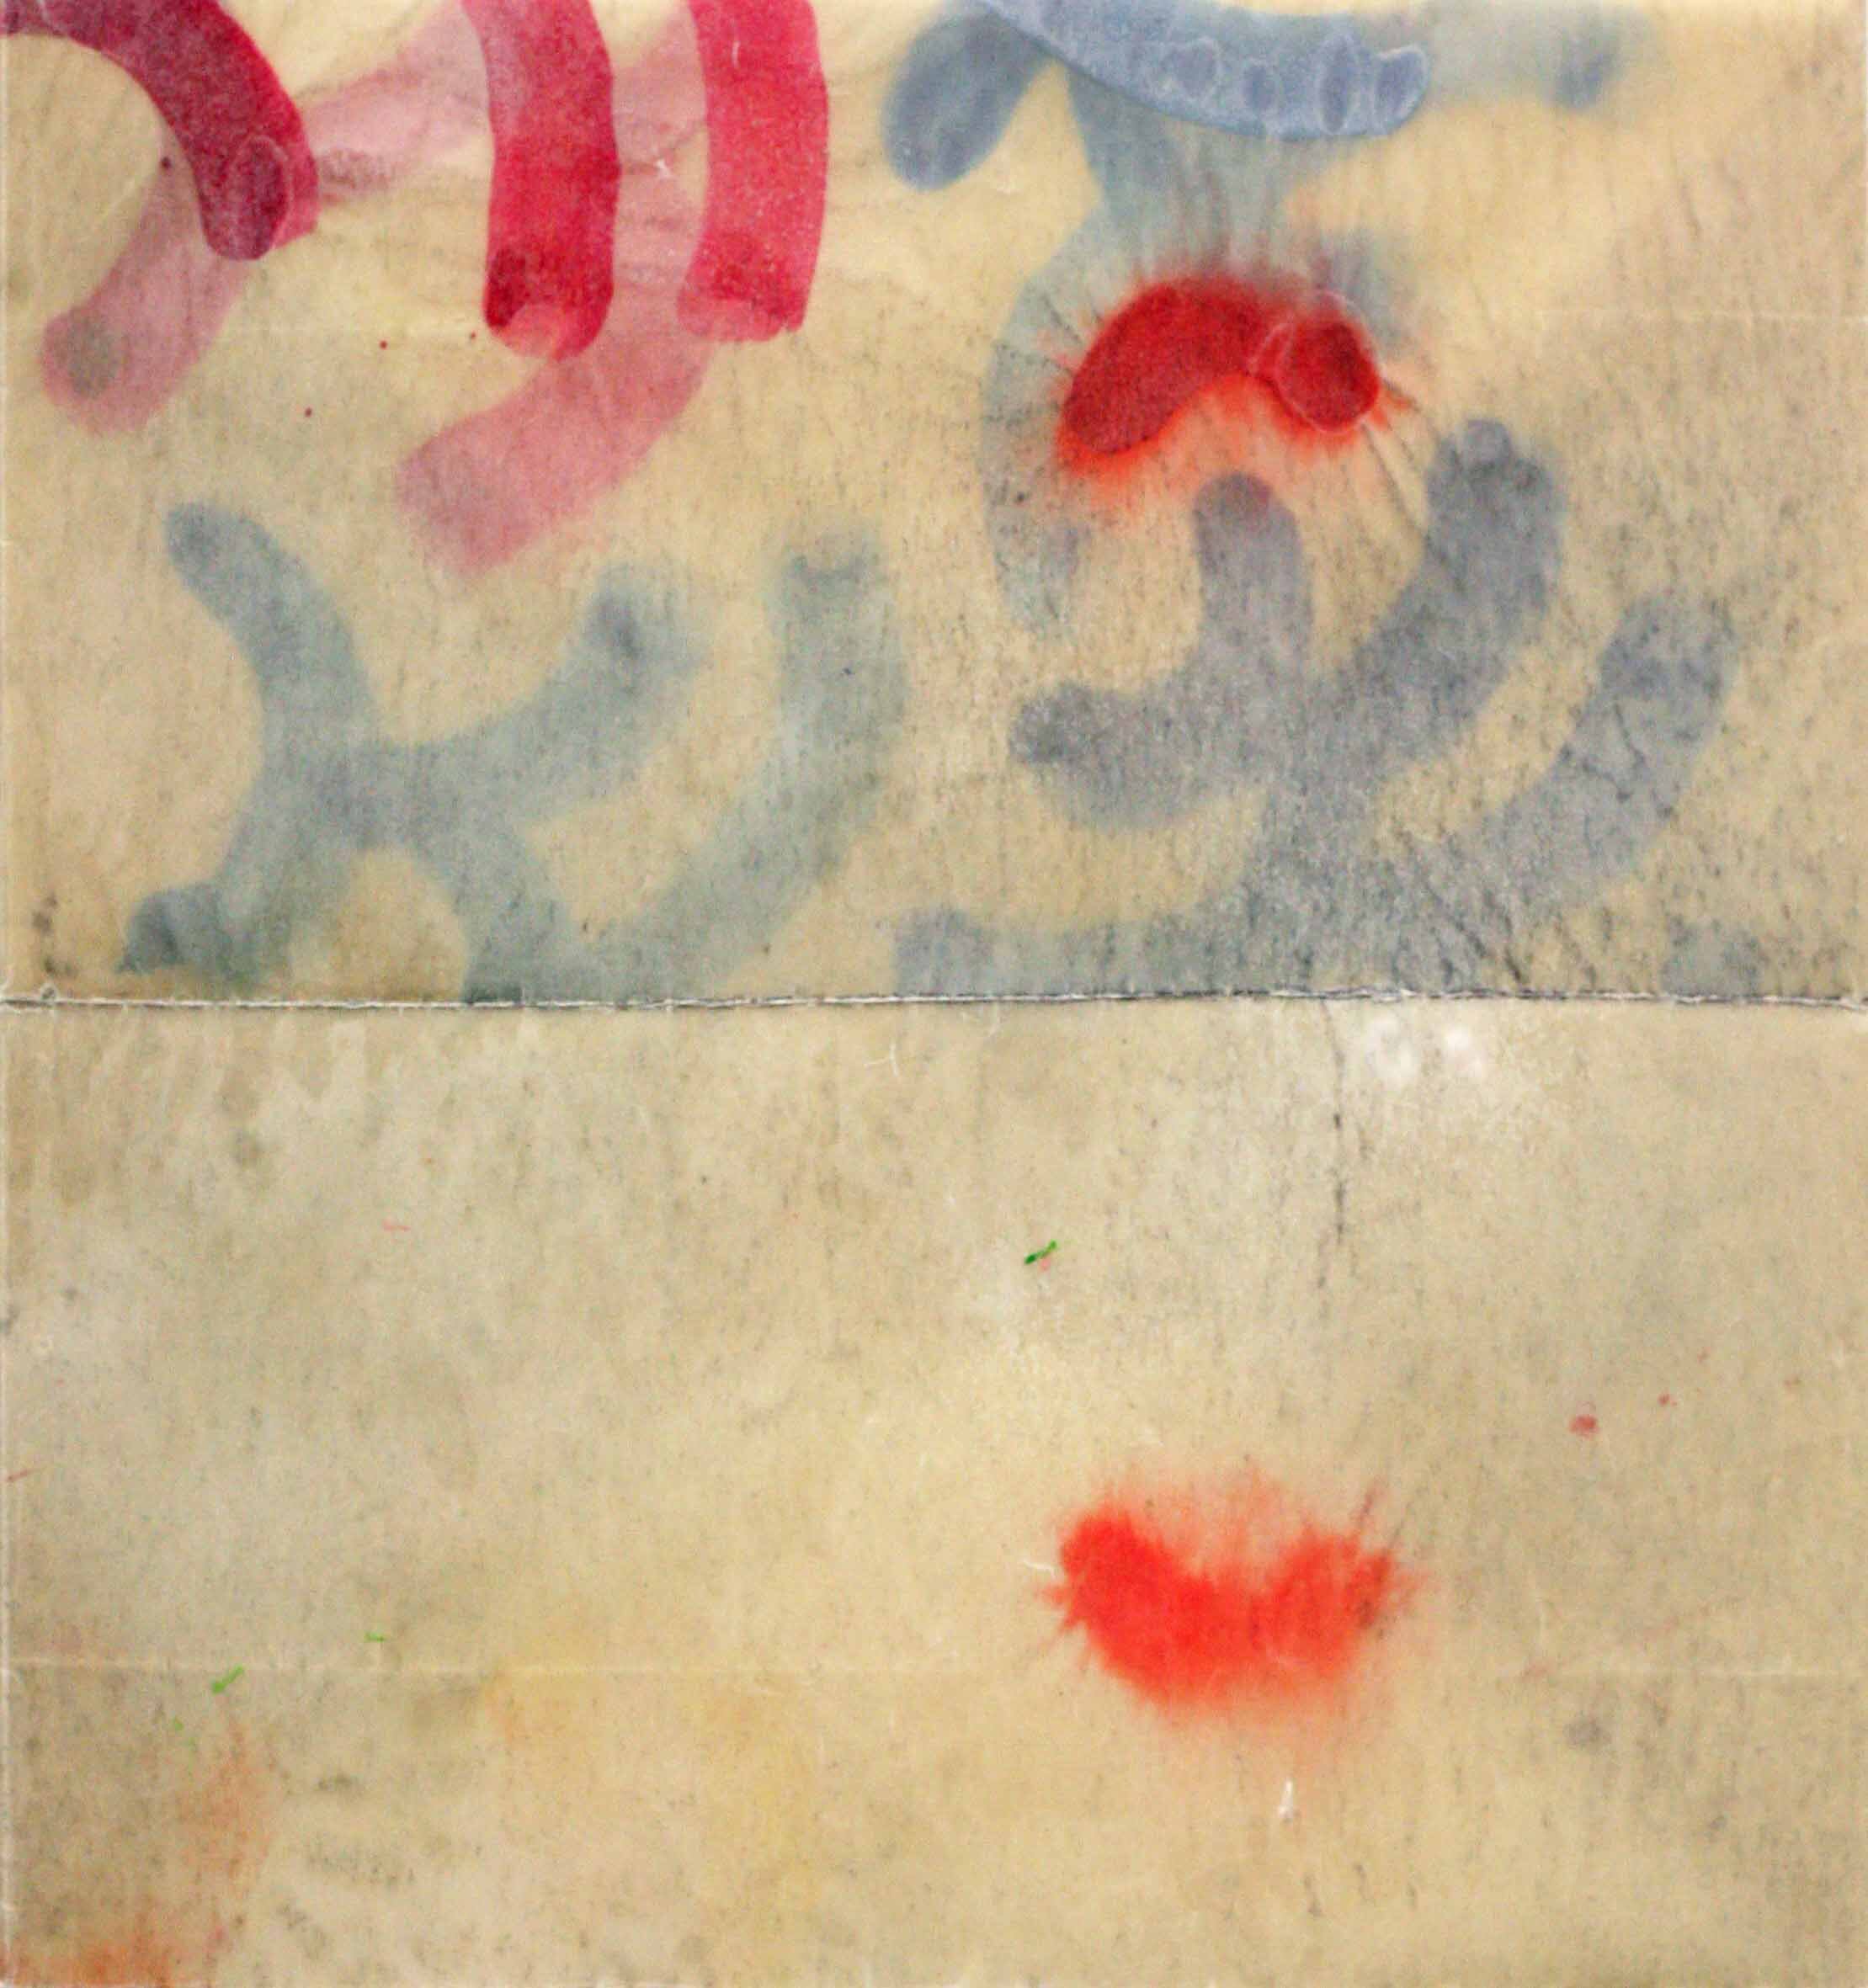  “Udo (6)”, 32 × 30 cm, Aquarell and Wax on Paper, 2013 